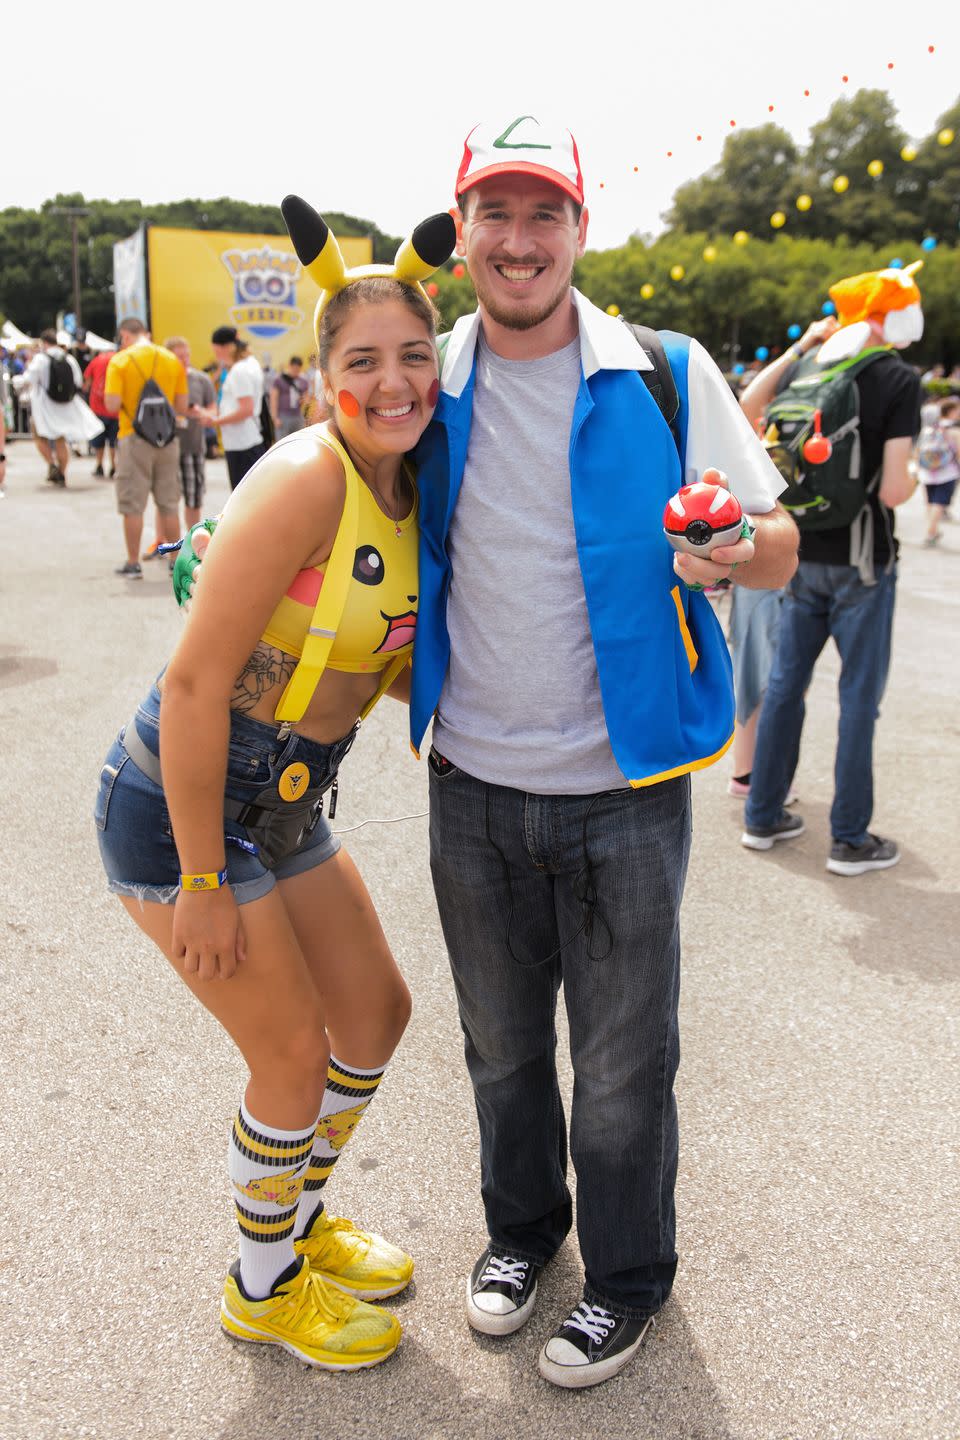 couples halloween costumes pikachu and ash from 'pokémon'